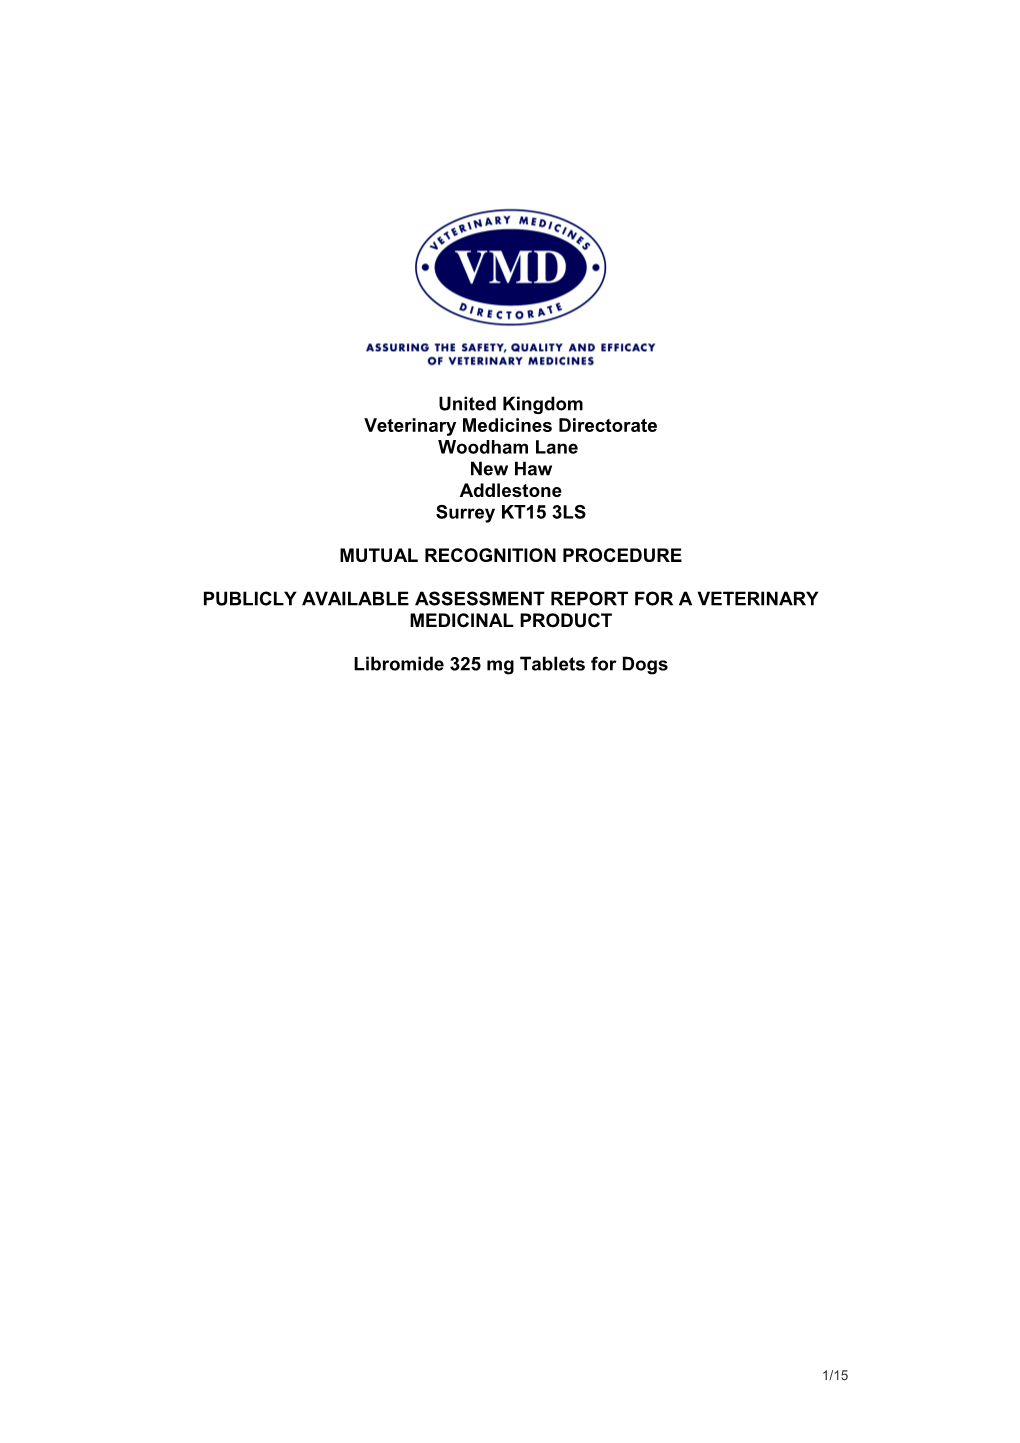 Publicly Available Assessment Report for a Veterinary Medicinal Product s8